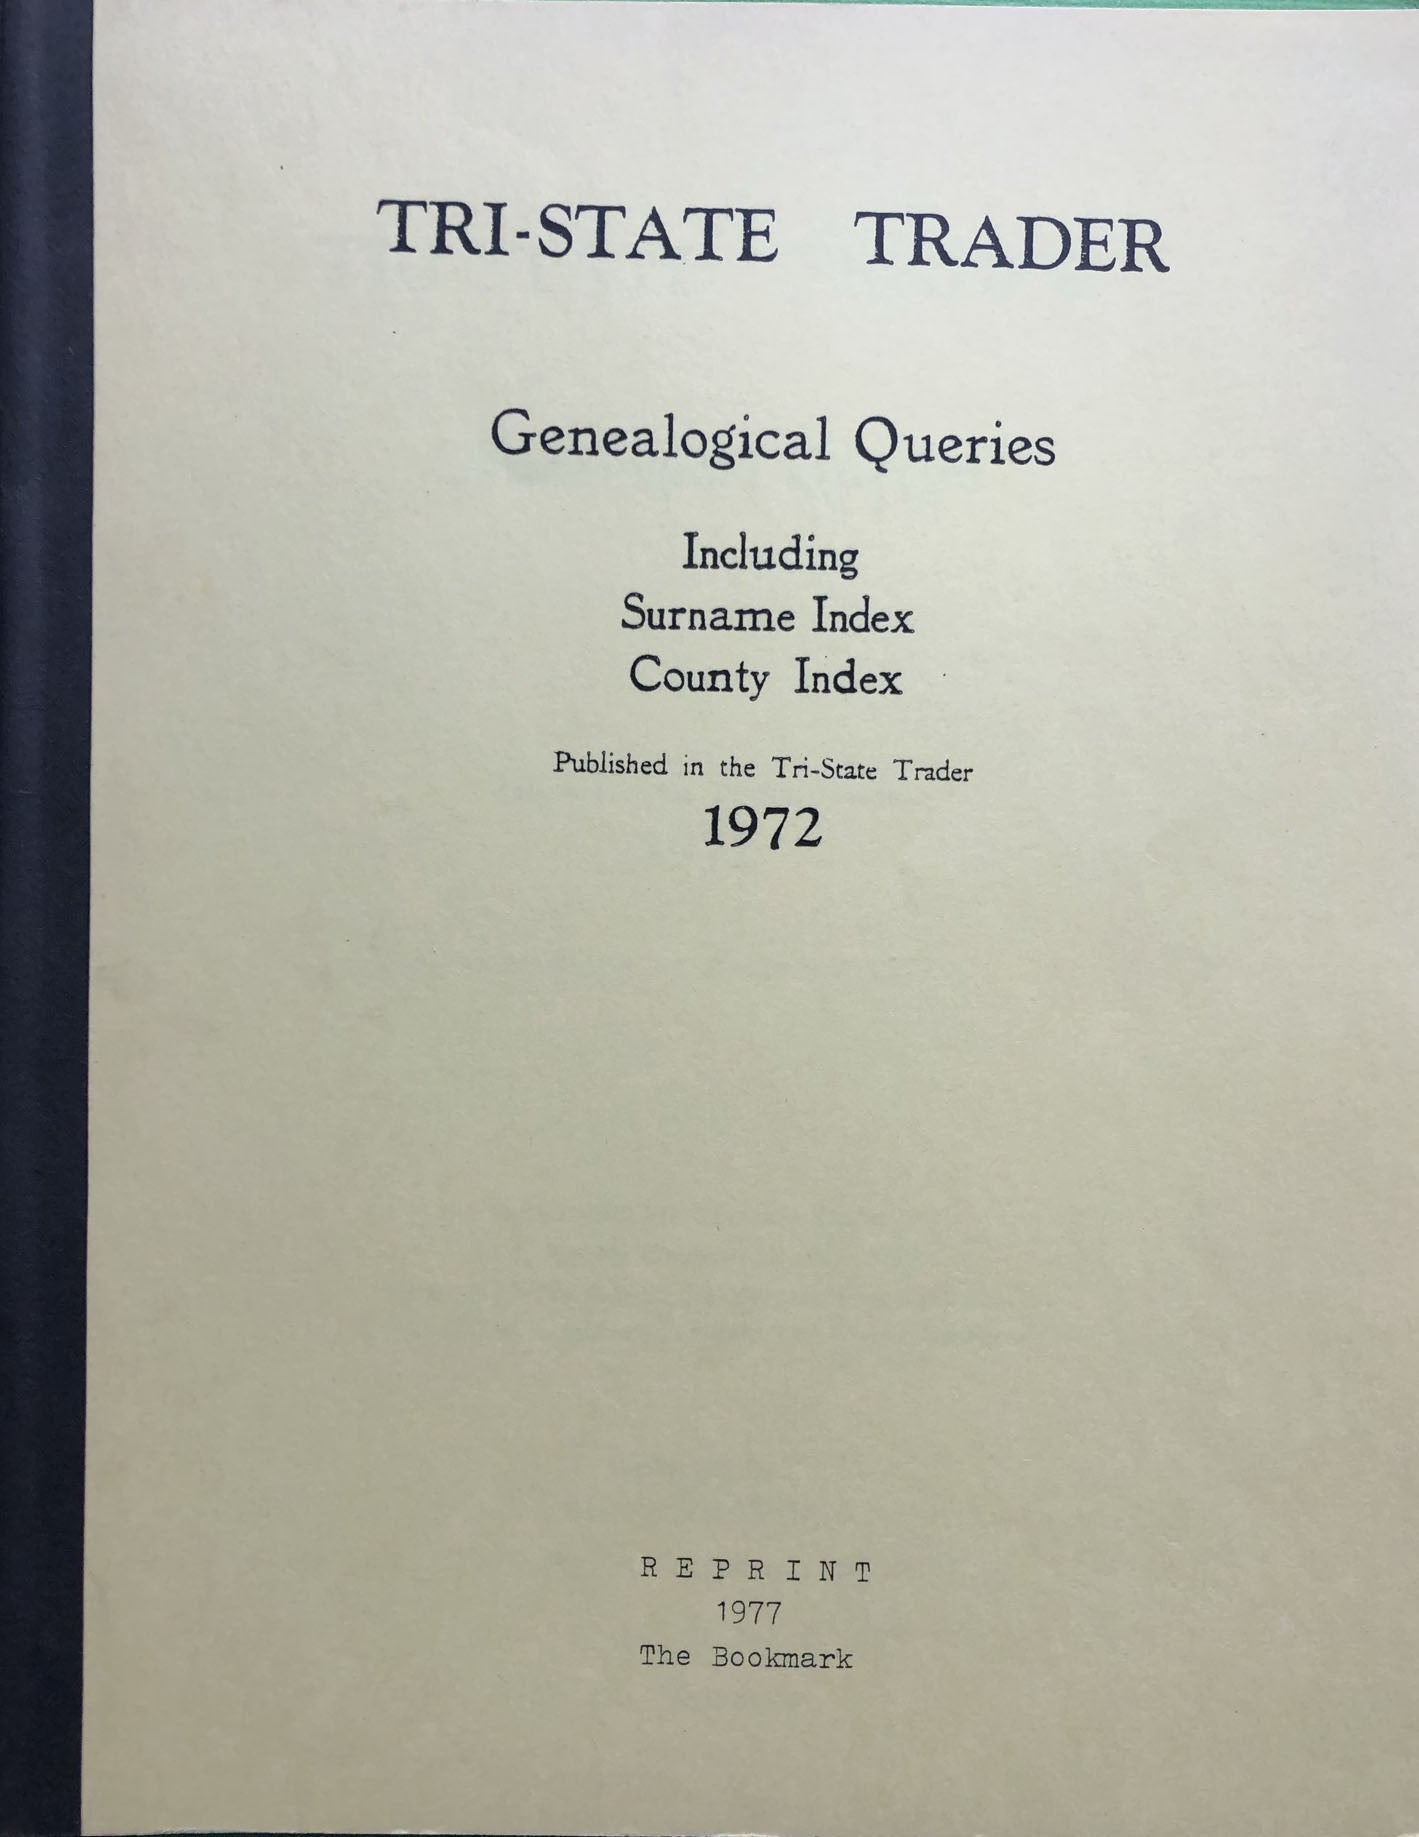 Tri-State Trader Genealogical Querries including Surname Index, County Index Booklets